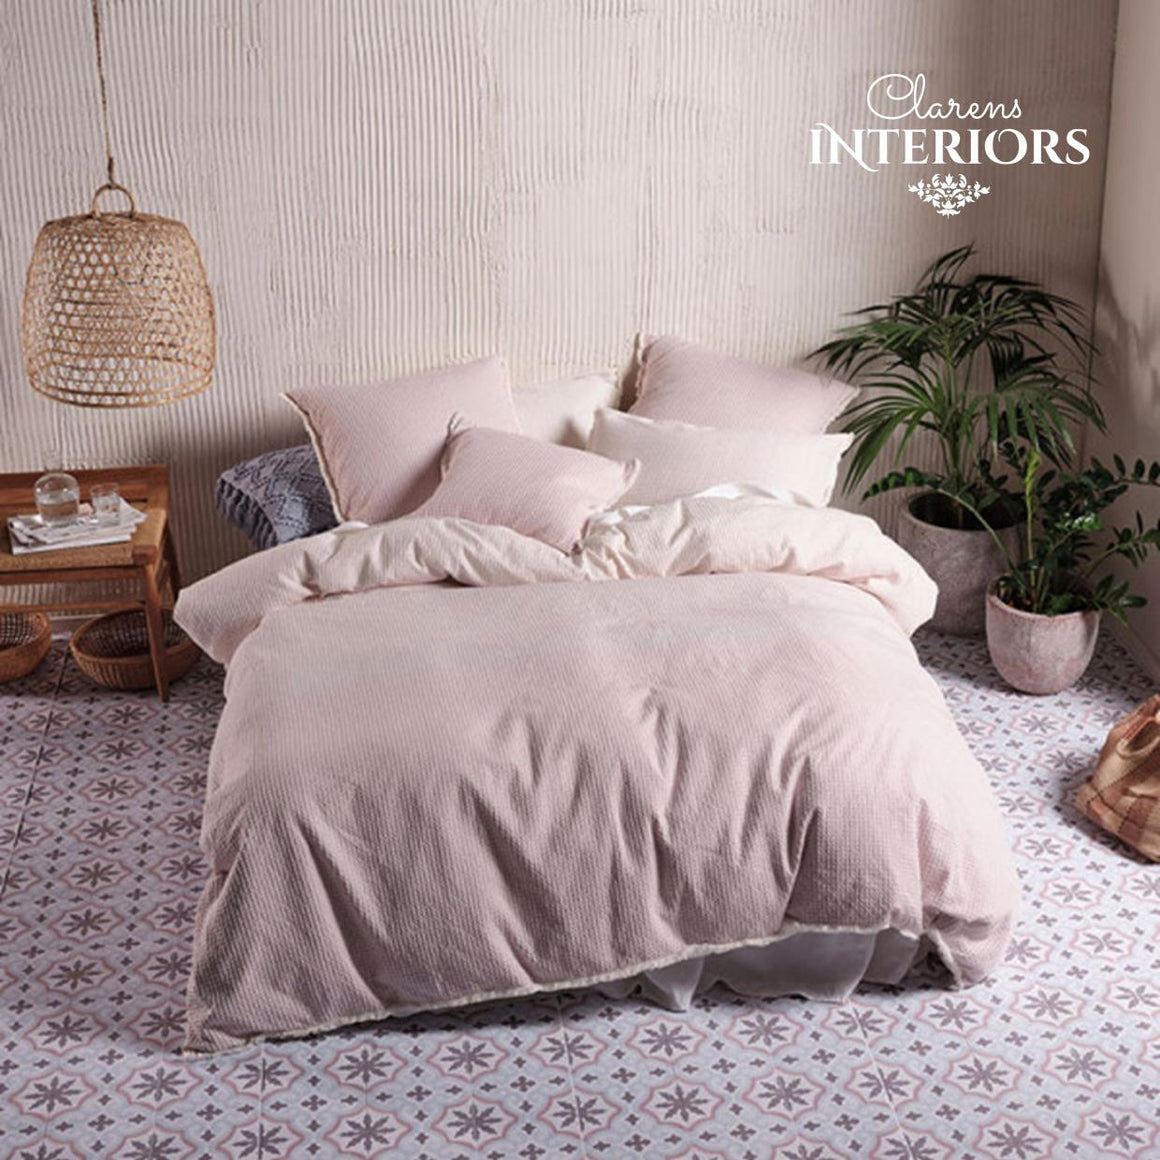 Lucca Blossom duvet cover set. Reminiscent of a coastal romance, Lucca enjoys a softly toned ombre in graduating hues of warm white and blossom pink on a beautifully woven and textured waffle ground. This cotton beauty is trimmed with fringing and reverses to a plain-dyed cotton.